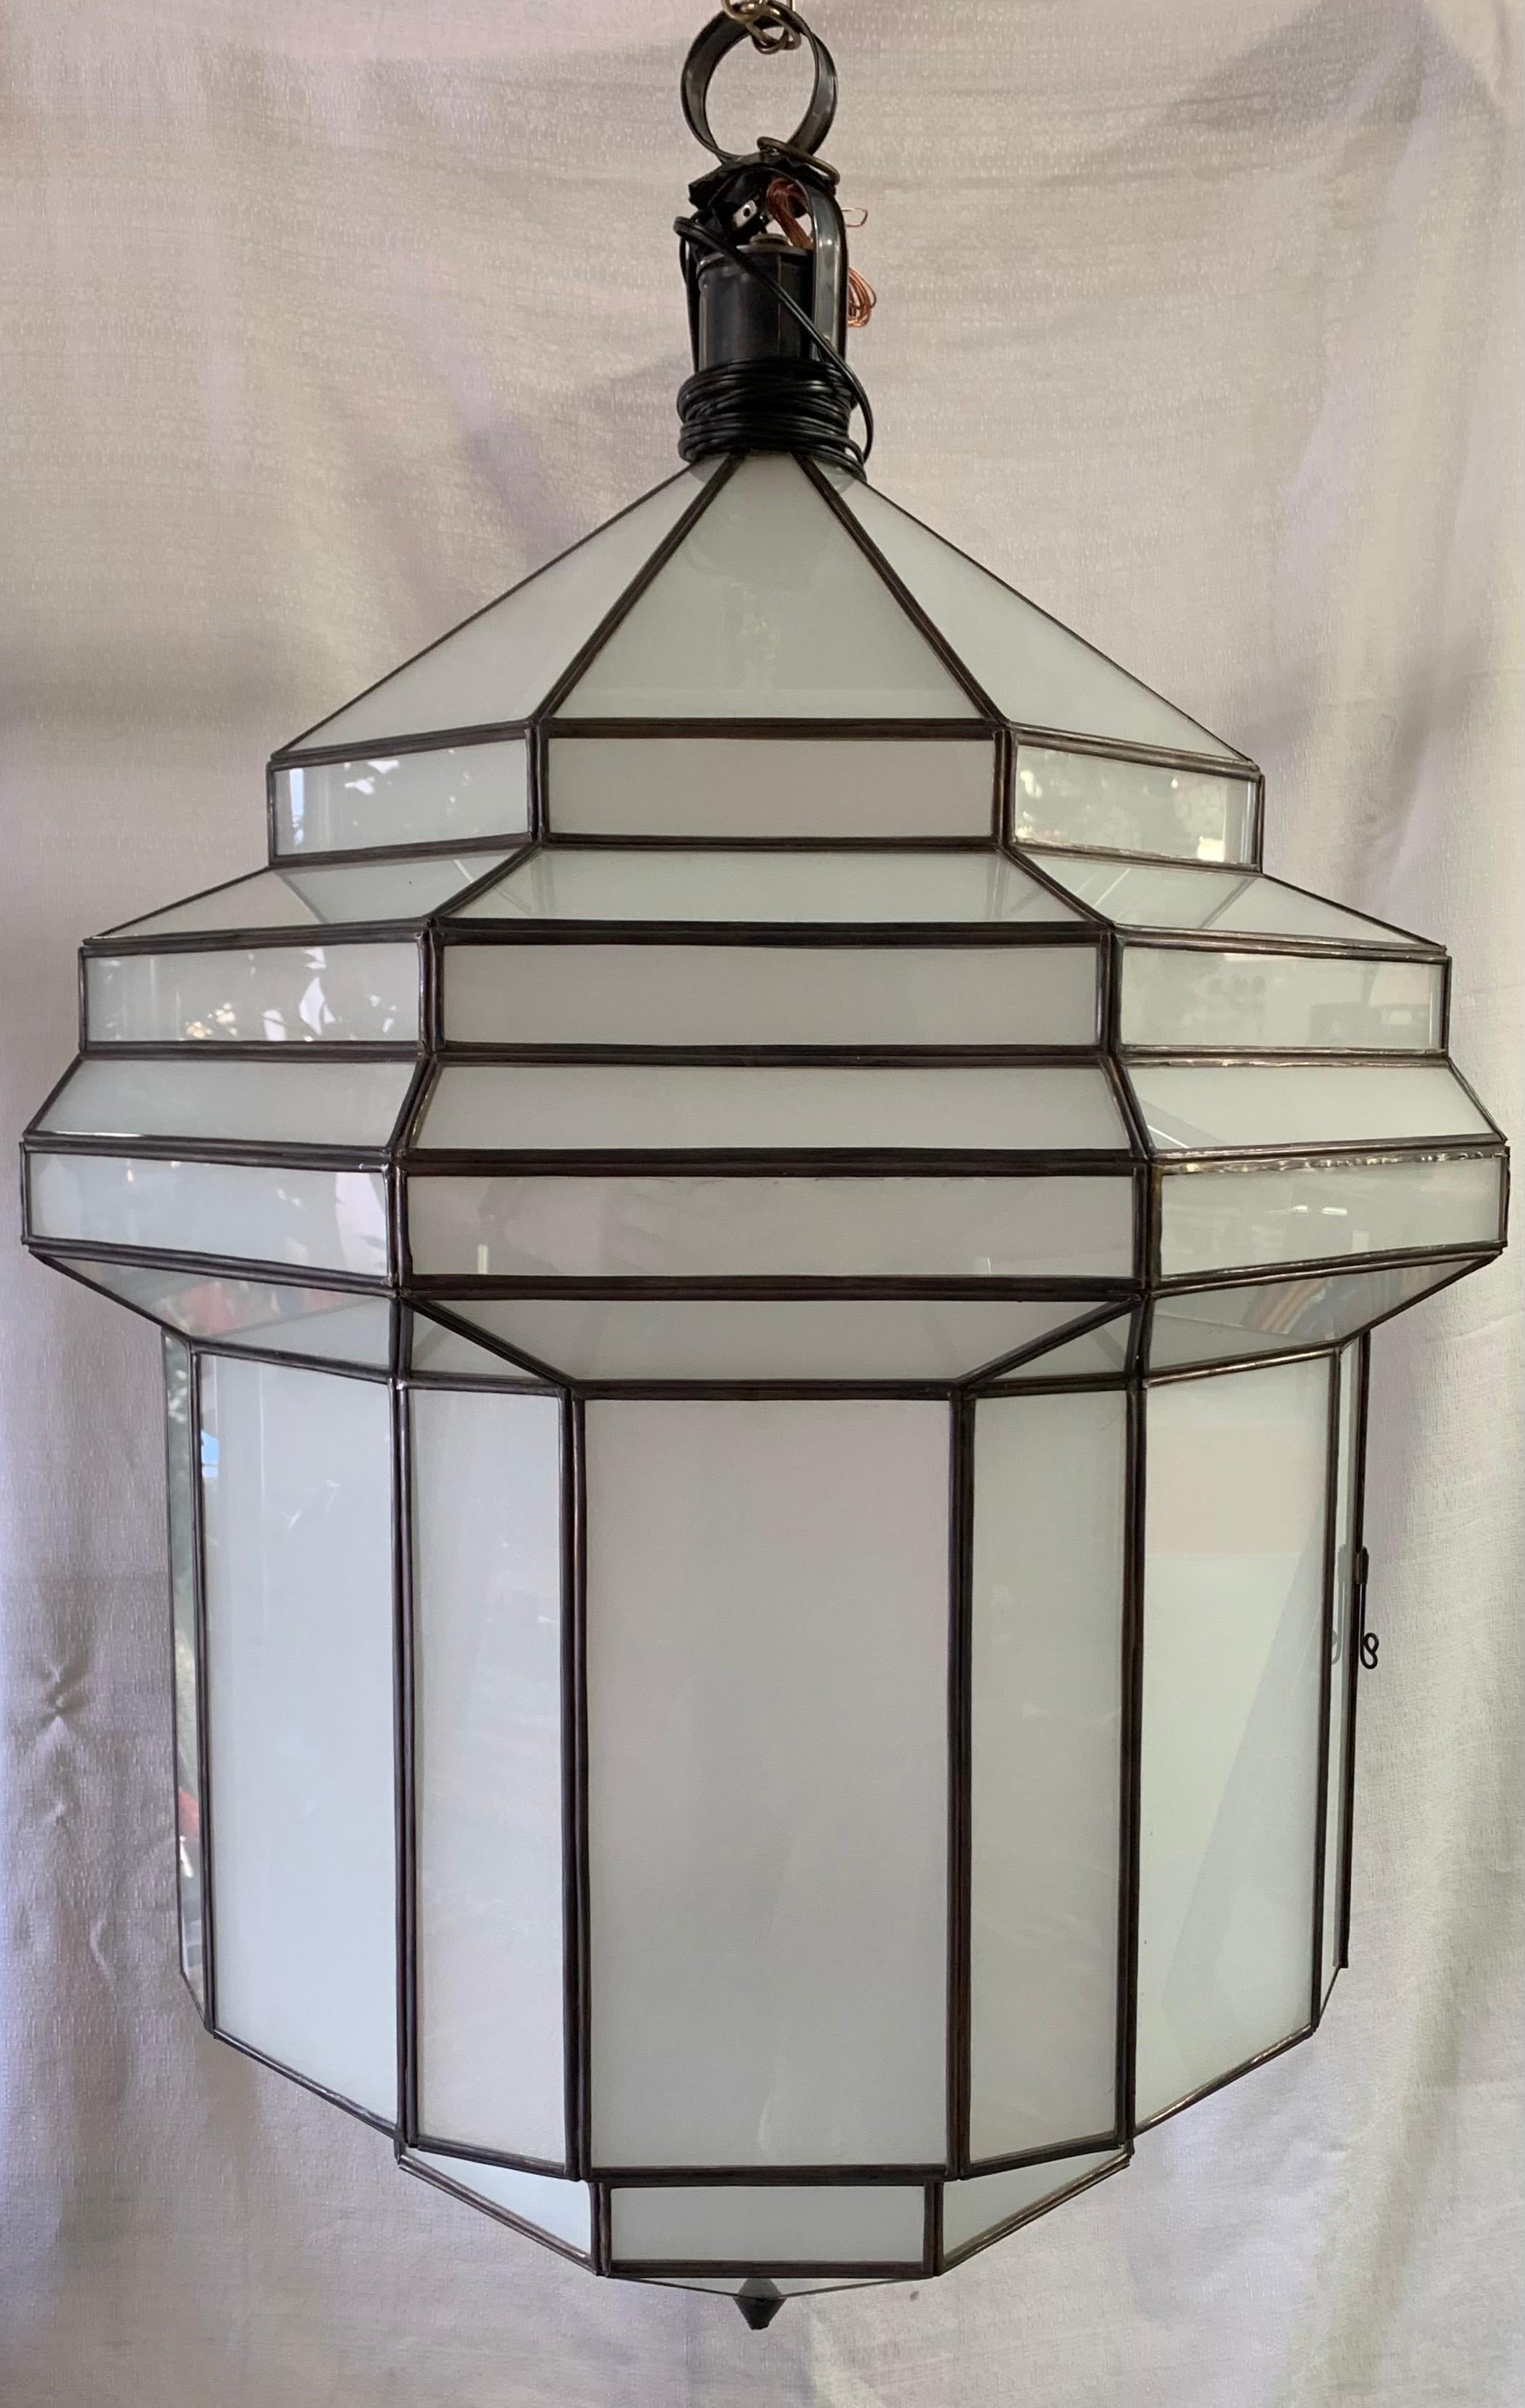 Large Art Deco white milk glass handmade chandelier, pendant, lantern, a pair

A gorgeous handcrafted, having individual panes, pair of large Art Deco hanging lanterns or ceiling fixtures featuring sandblasted frosted milky glass and patinated